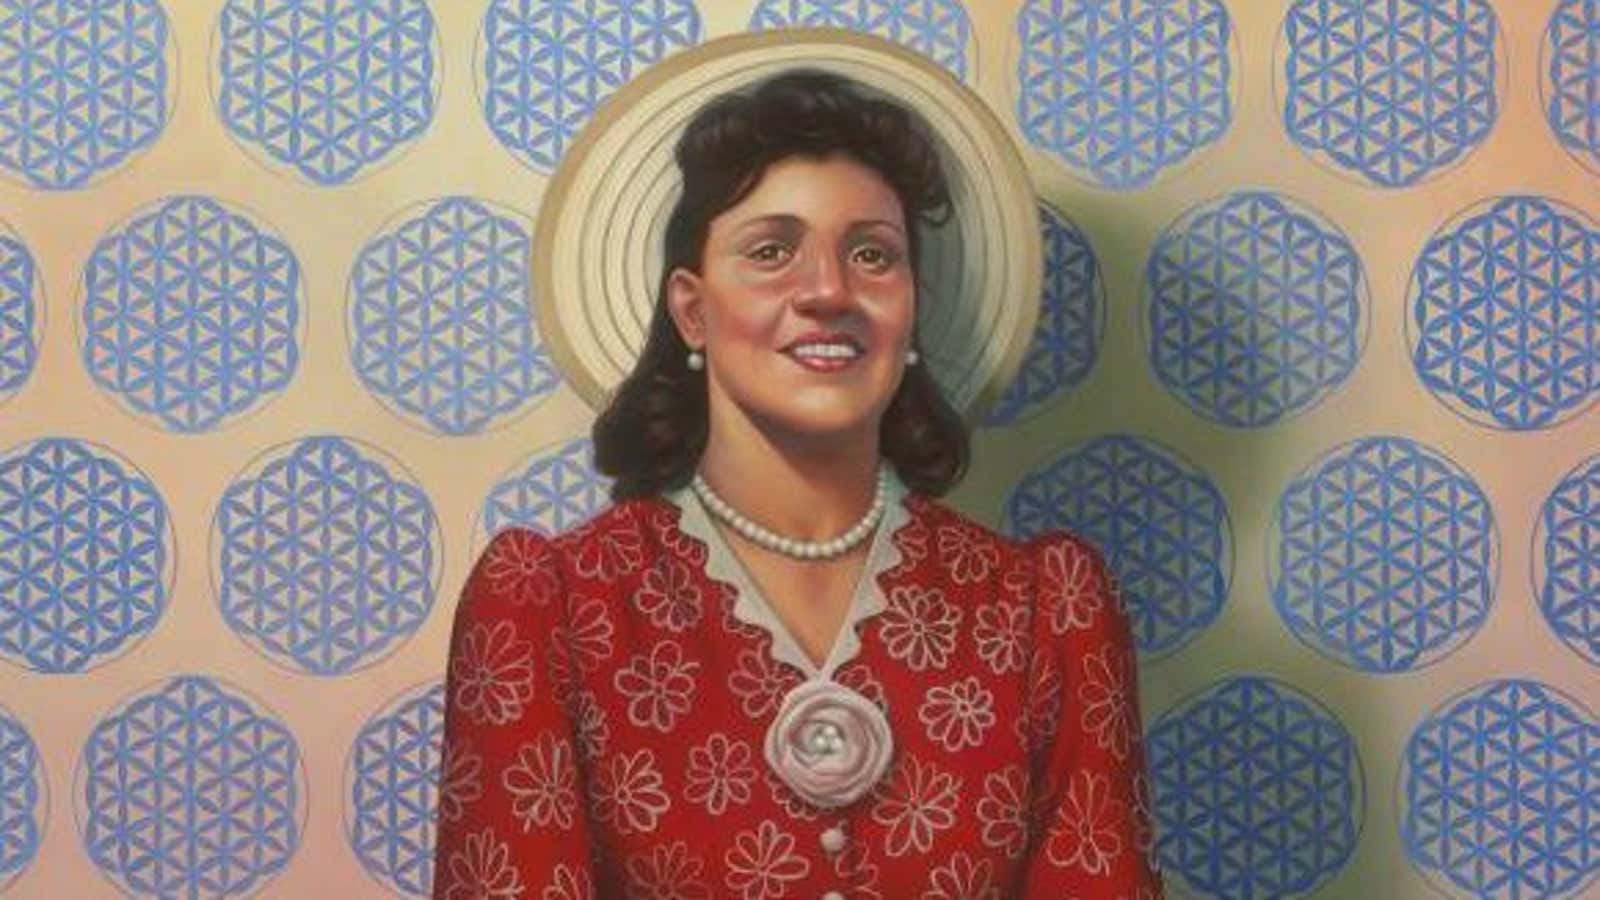 Henrietta Lacks’ cells were taken without her consent and used by researchers around the world